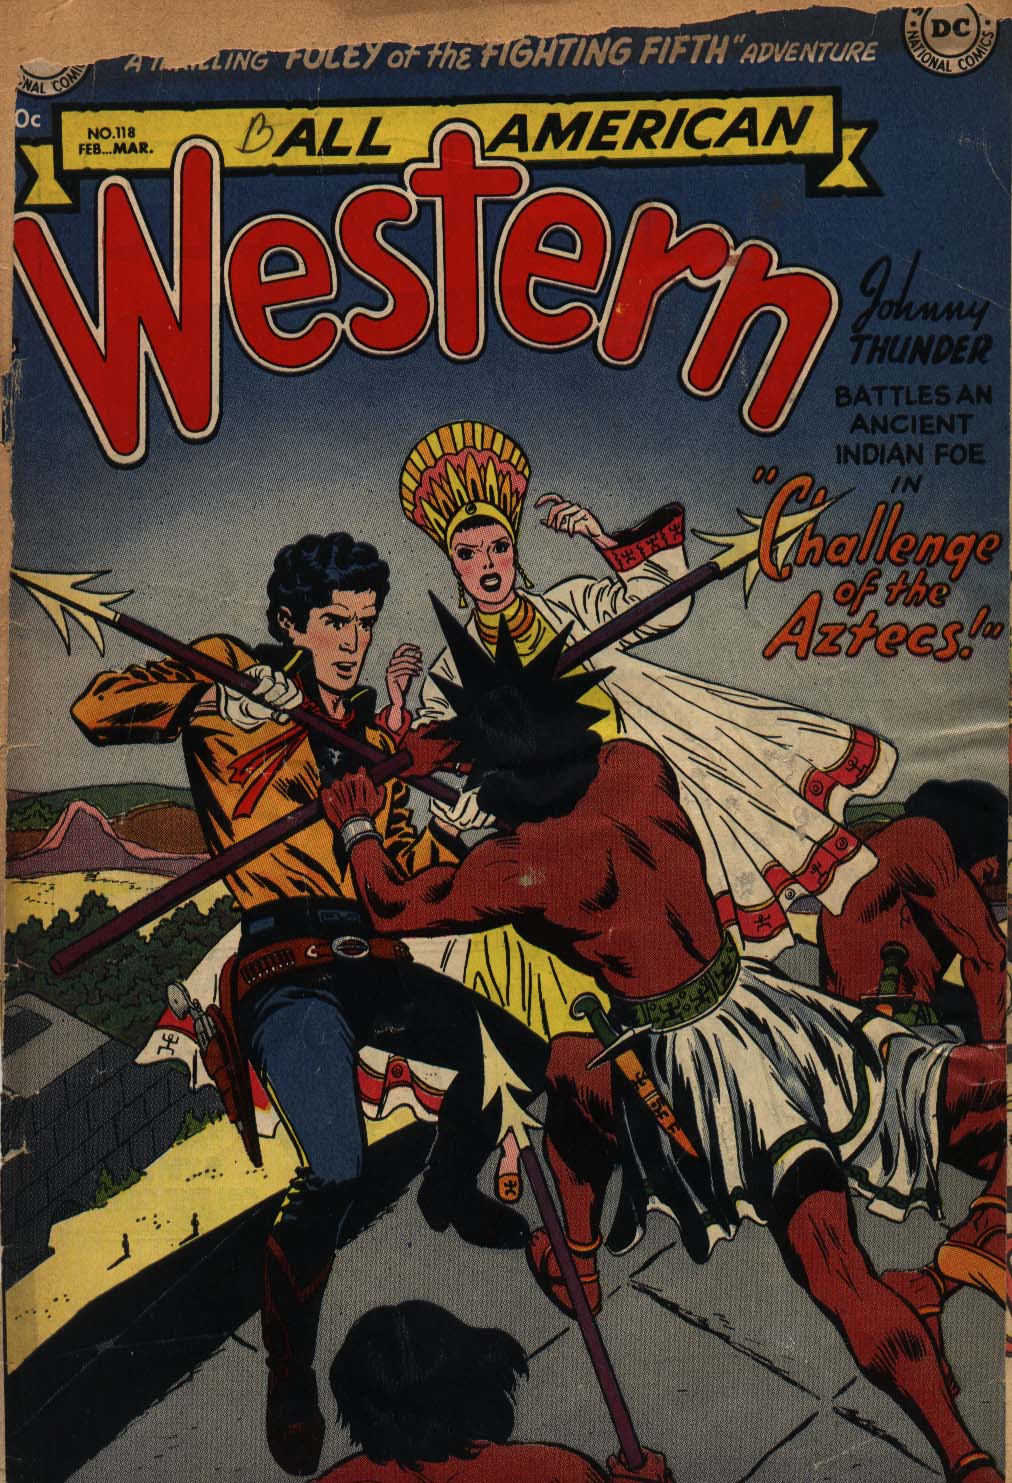 Read online All-American Western comic -  Issue #118 - 1